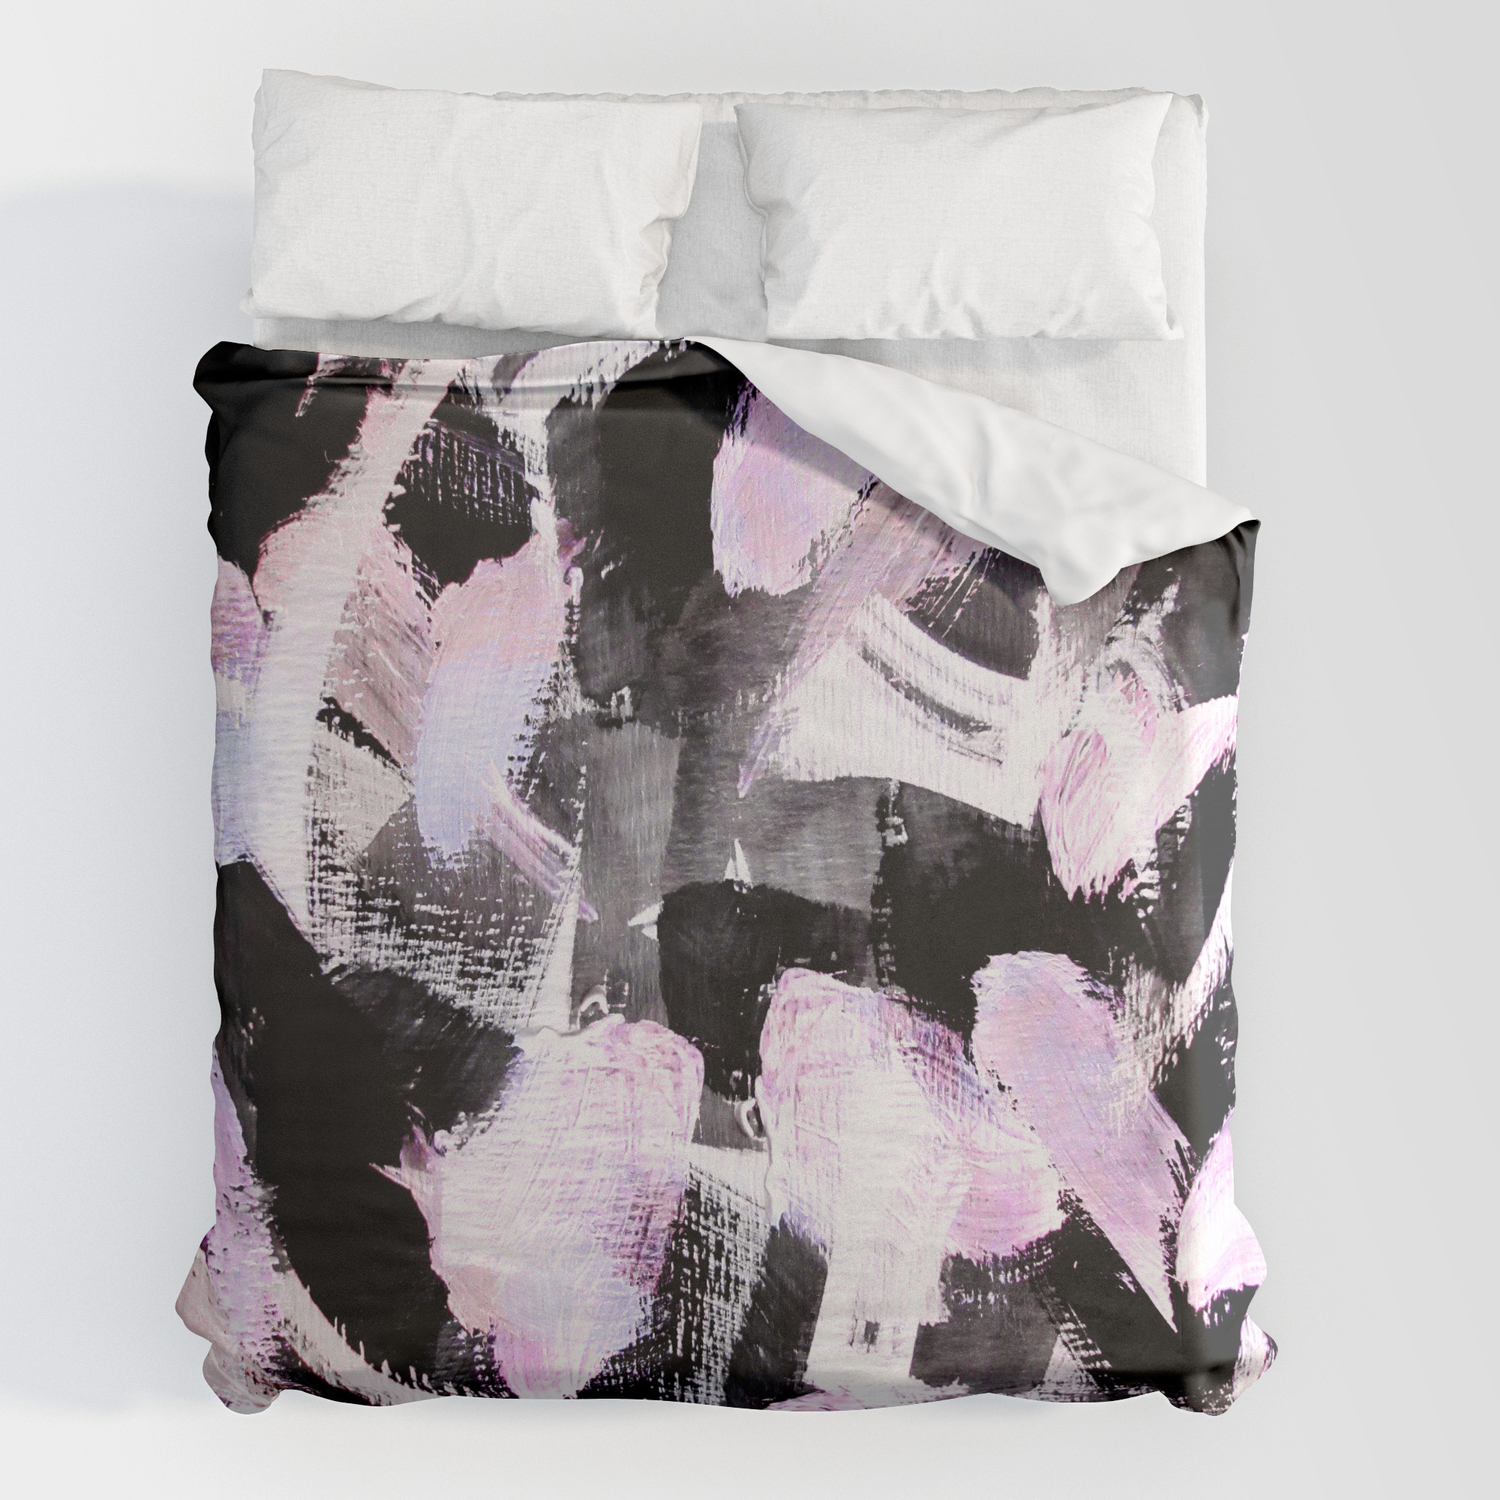 Abstract Painting Duvet Cover, Hot Pink And Black Duvet Cover